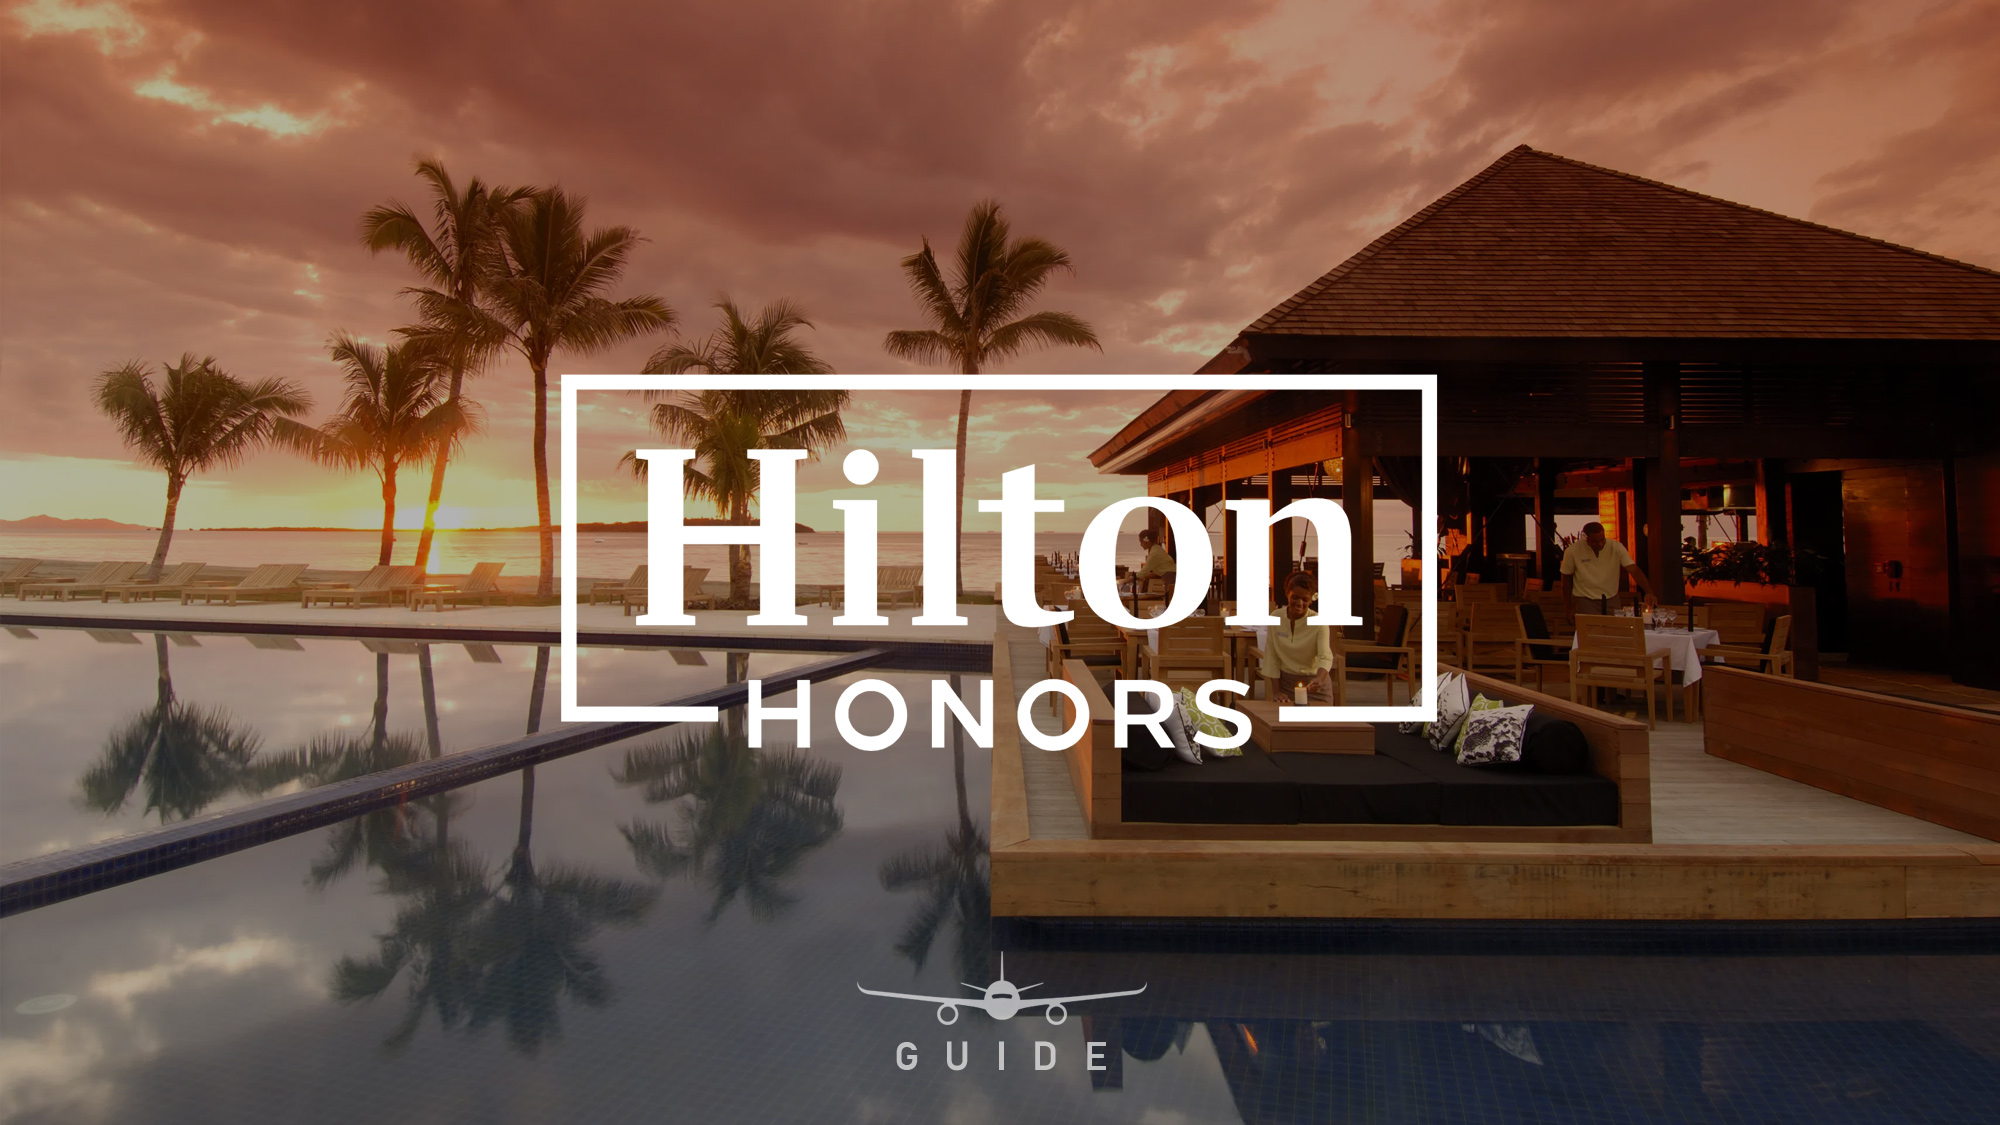 Your Ultimate Guide To The Hilton Honors Program And Elite Status Benefits